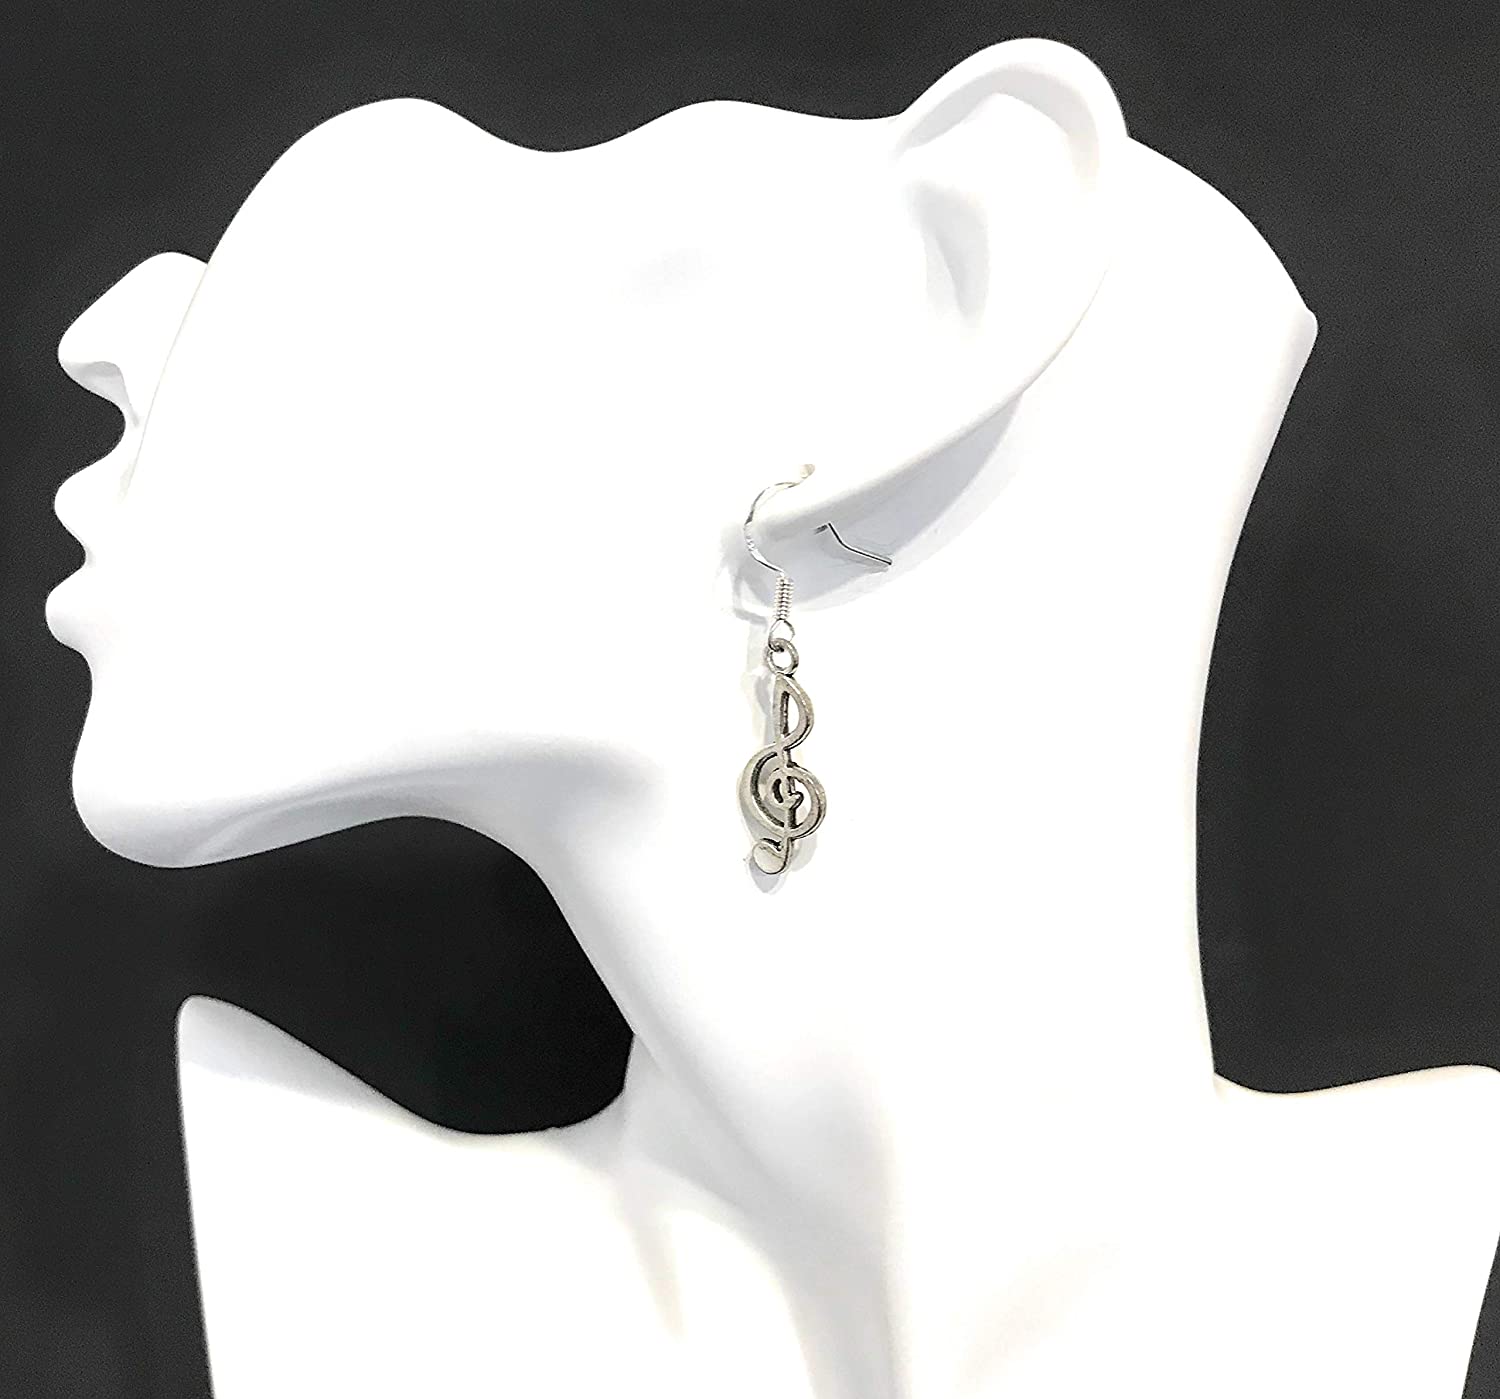 Treble C Clef Charm Dangle Earrings on Mannequin from Scott D Jewelry Designs